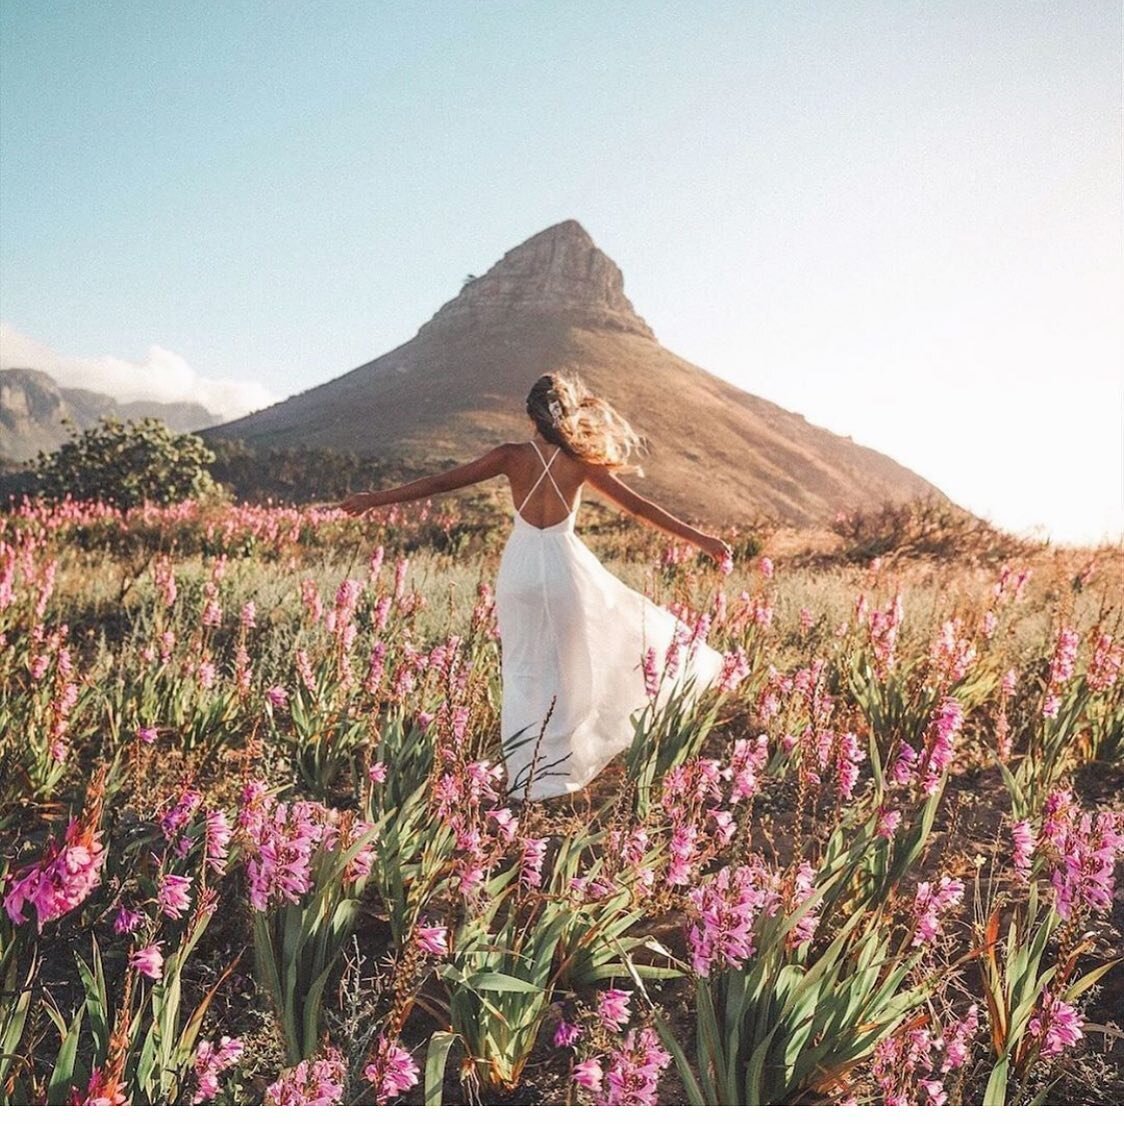 Come find open space and freedom in Cape Town - along with top-notch medical care. 
#fertilitytravel #fertility #eggfreezing  #capetown #travel #medicaltravel 
Photo credit: @campsbaygirl